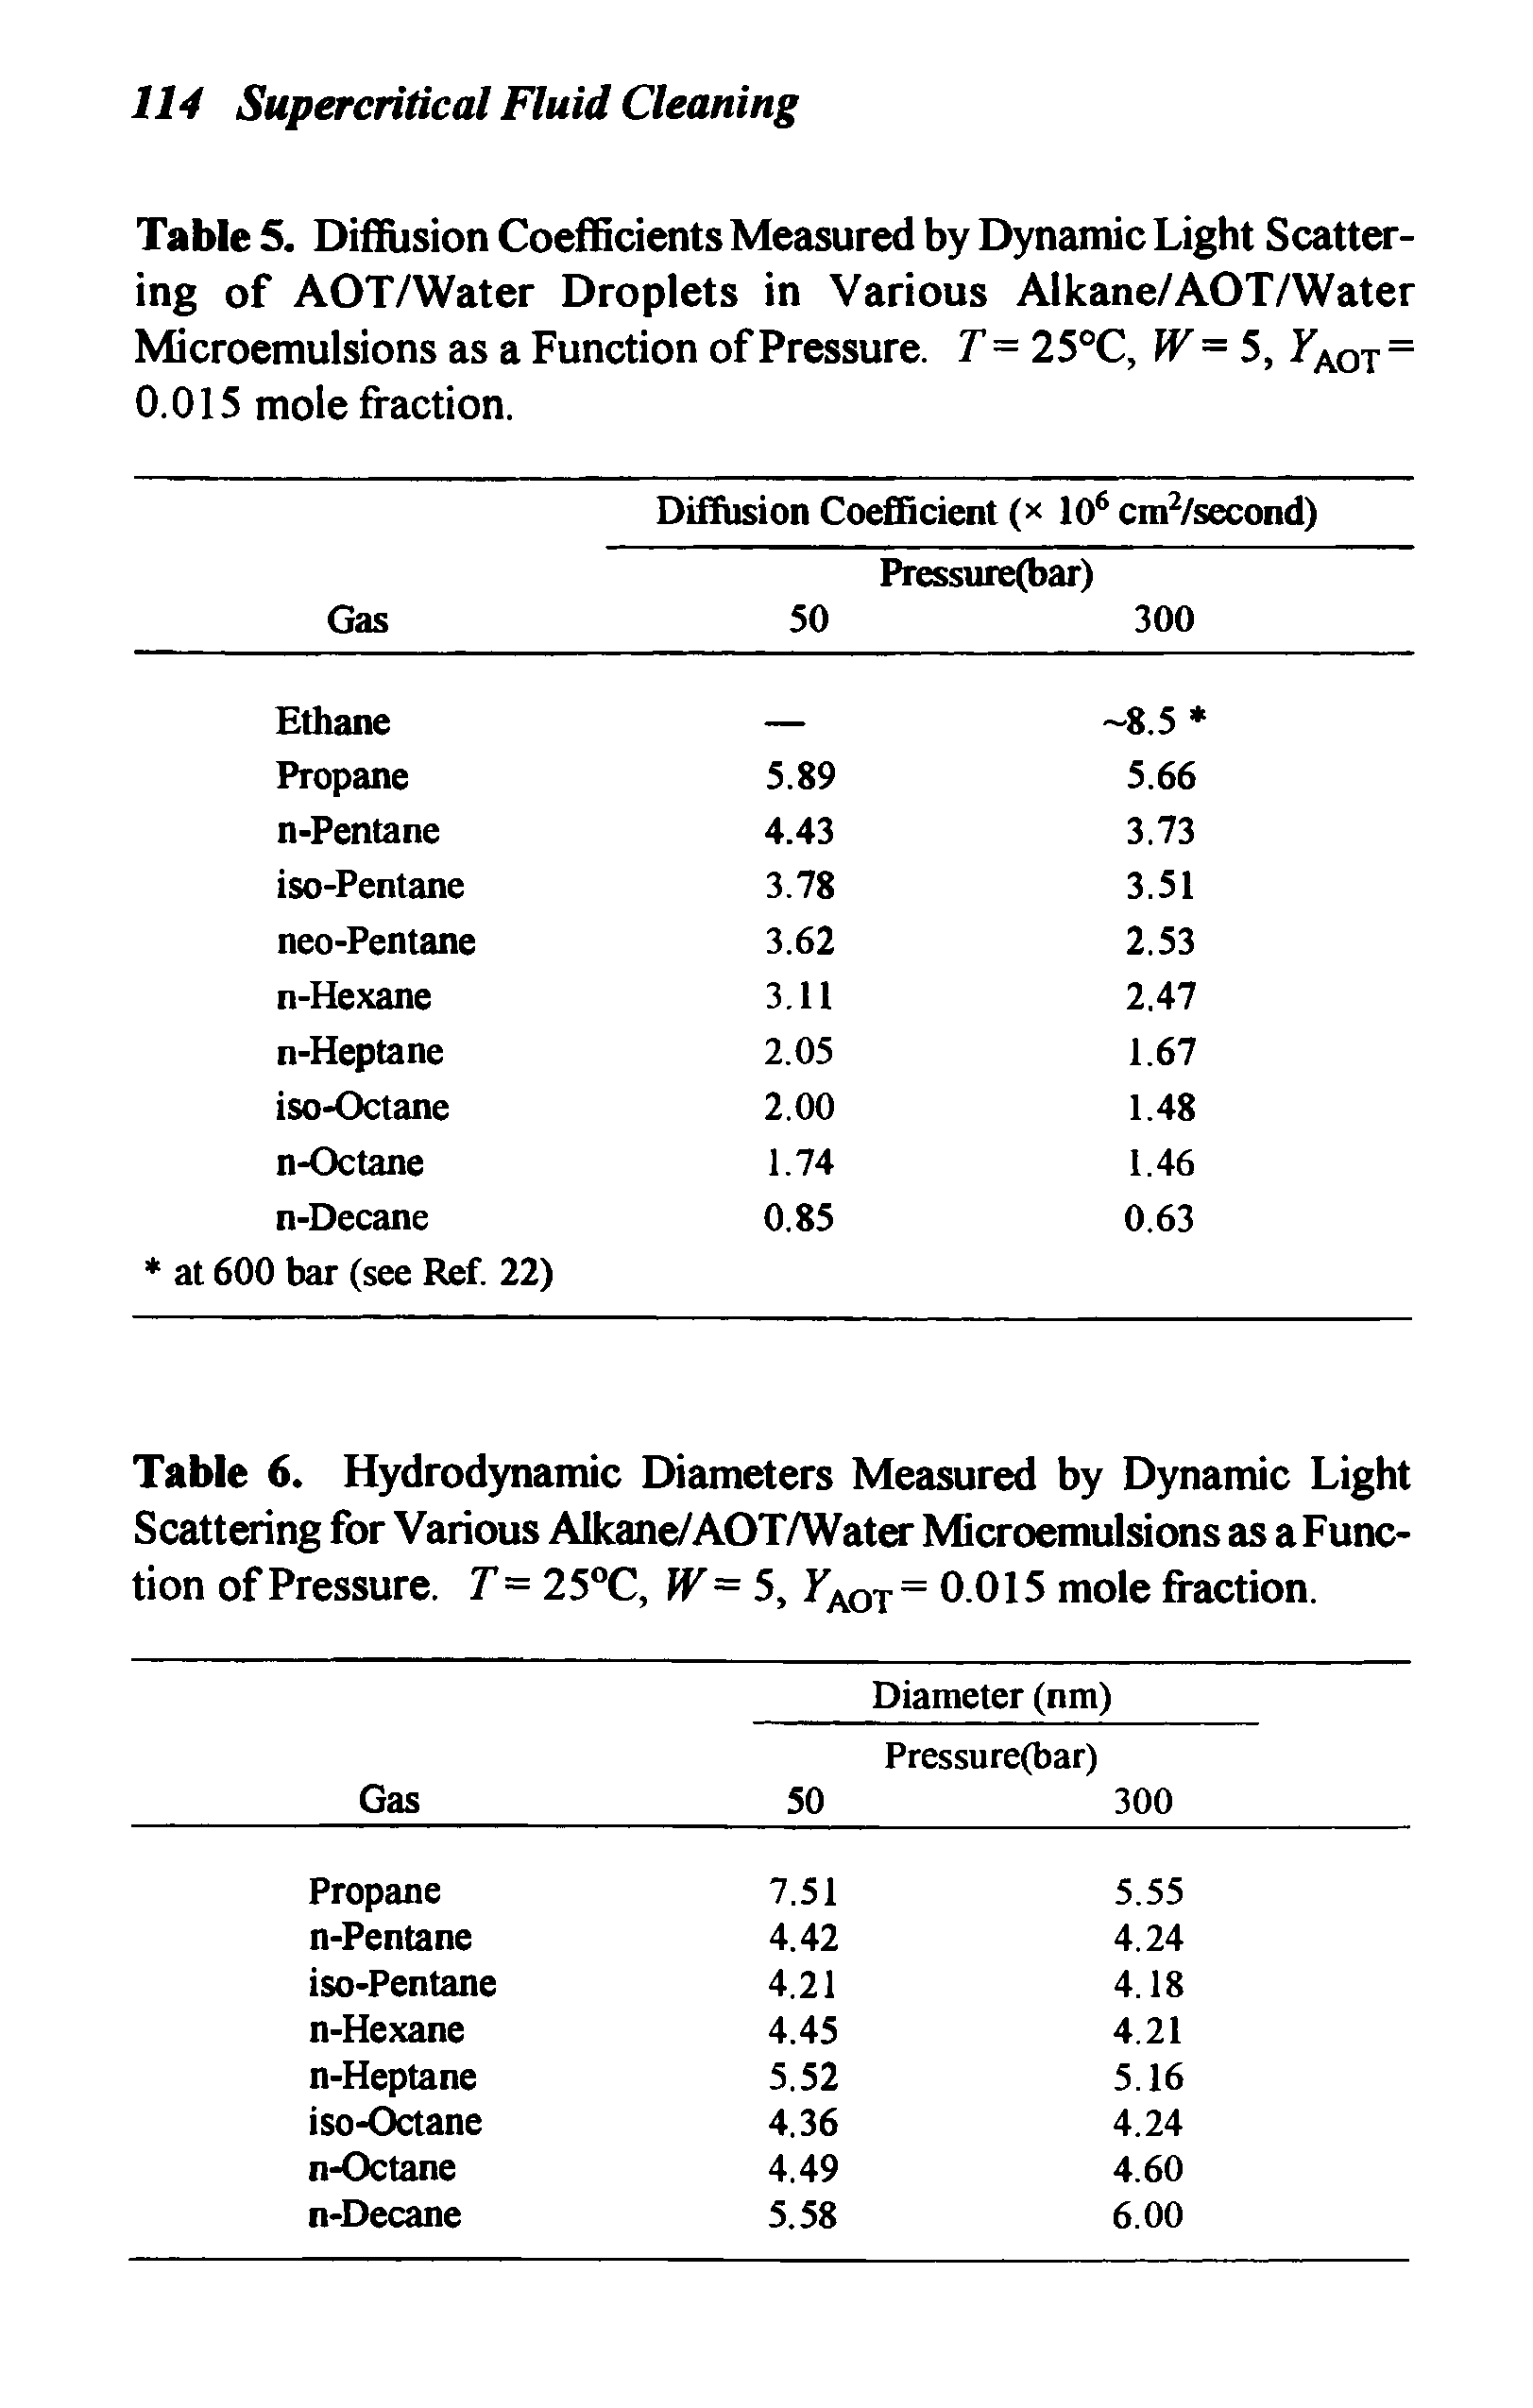 Table 5. Diffusion Coefficients Measured by Dynamic Light Scattering of AOT/Water Droplets in Various Alkane/AOT/Water Microemulsions as a Function of Pressure. T= 25°C, W= 5, Faot 0.015 mole fraction.